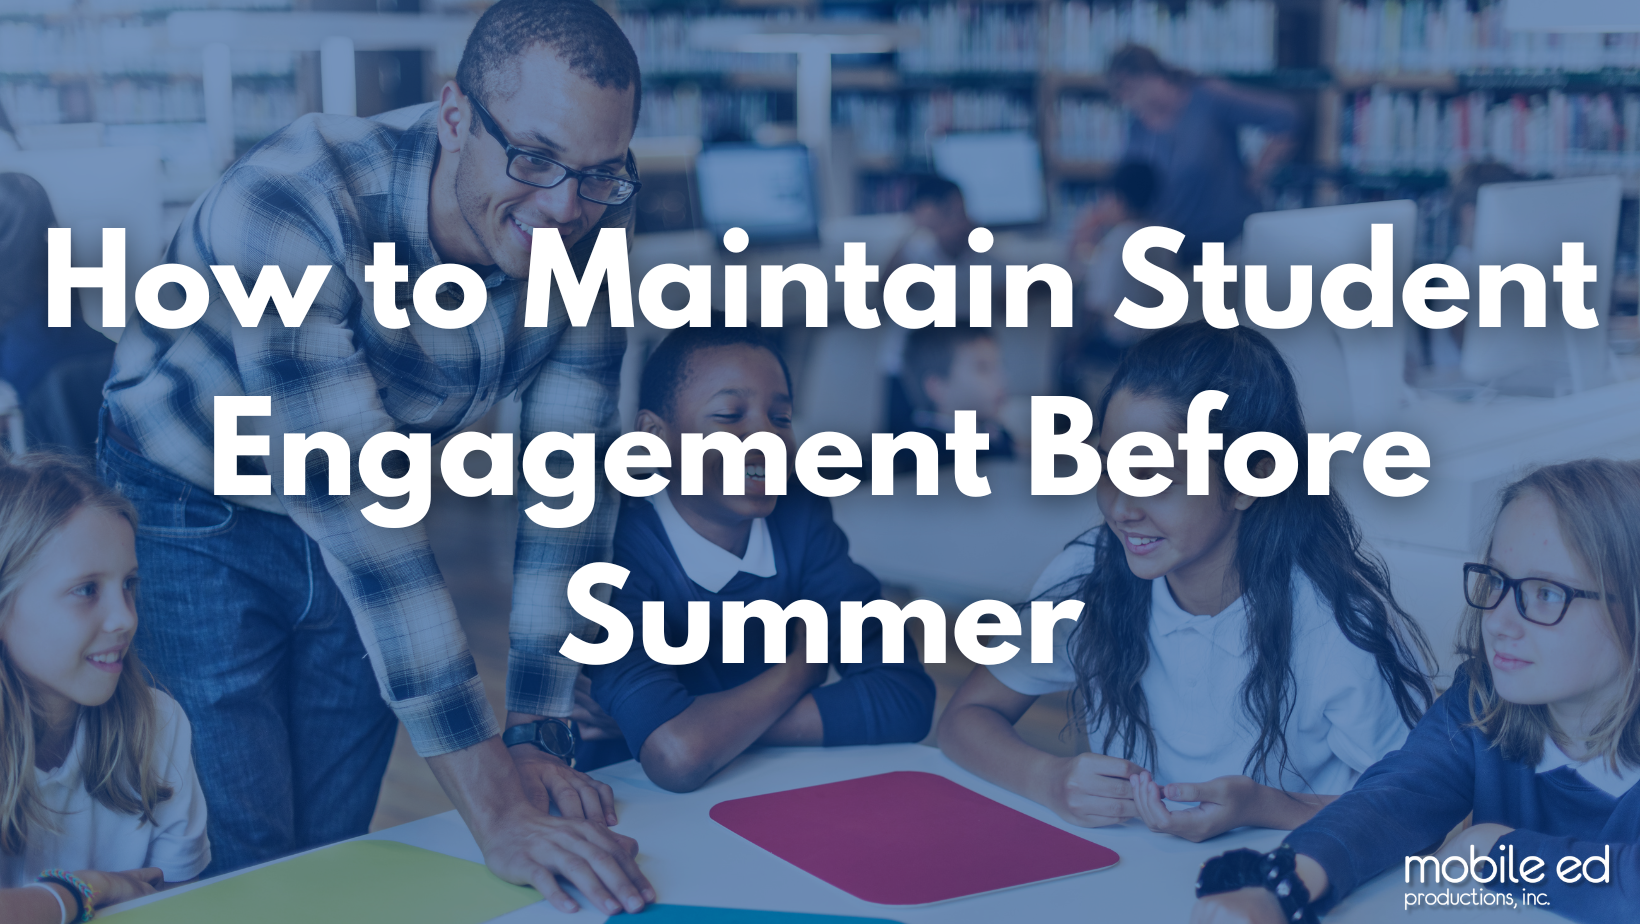 How to Maintain Student Engagement Before Summer